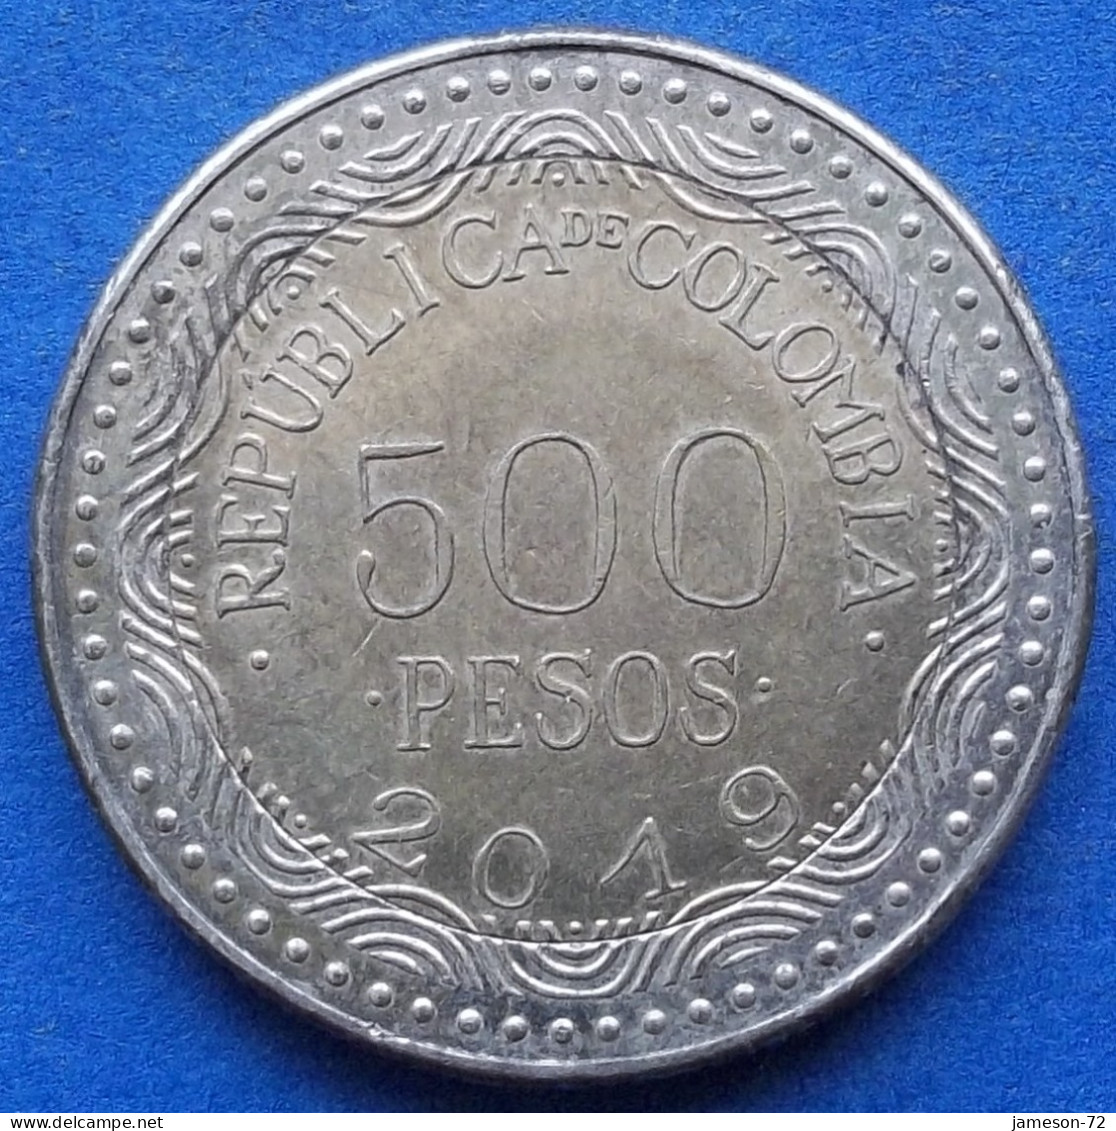 COLOMBIA - 500 Pesos 2019 "Glass Frog" KM# 298 Republic - Edelweiss Coins - Colombie